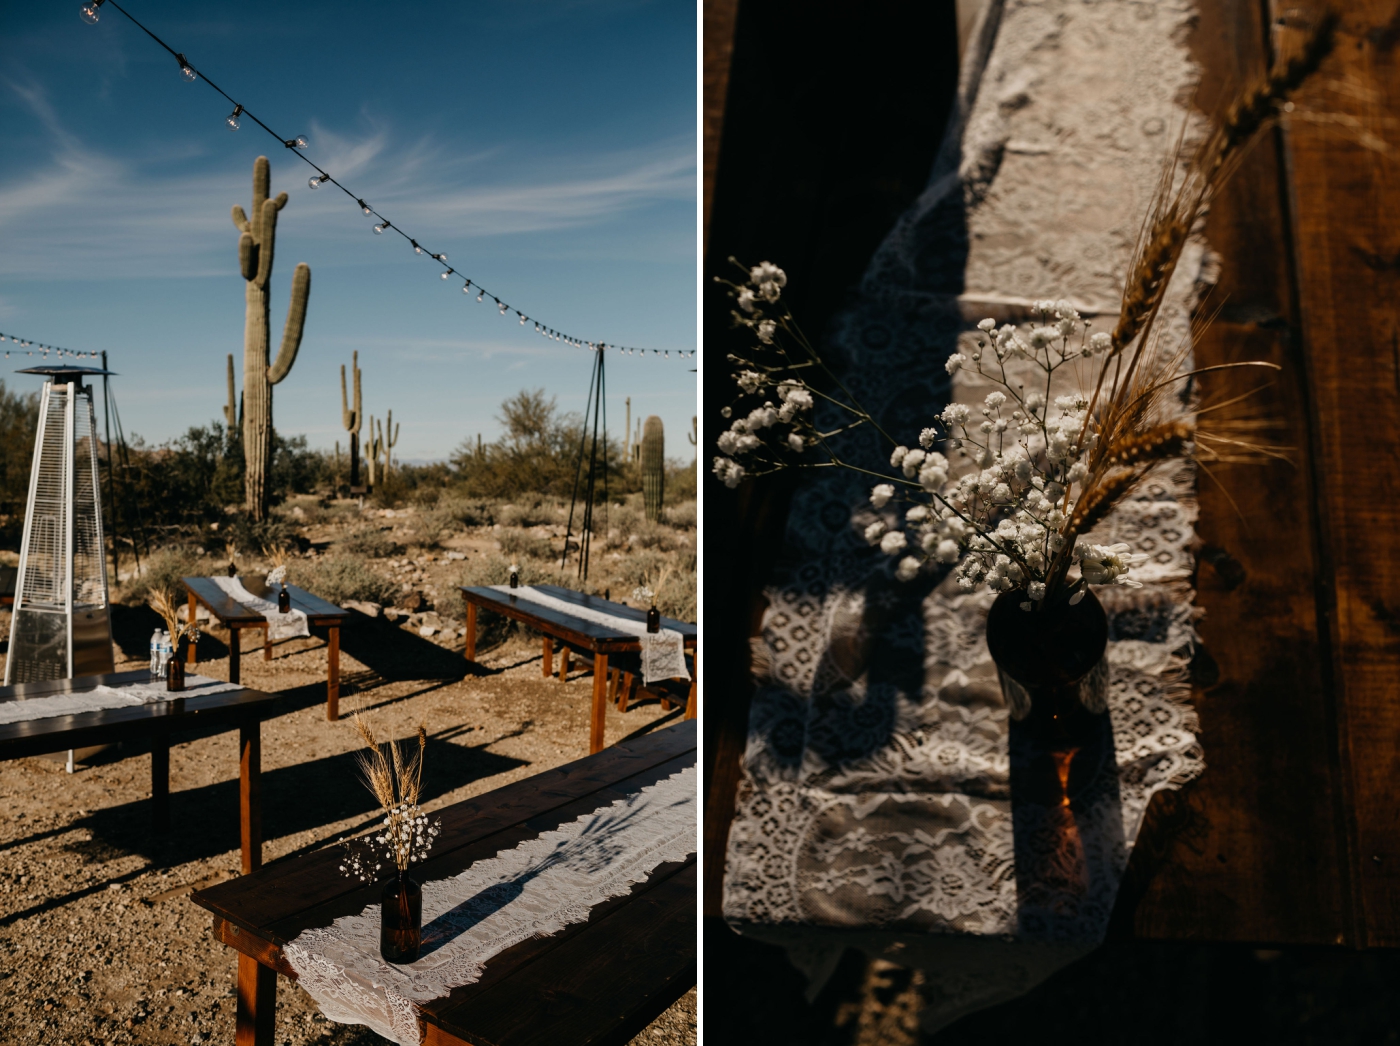 How to plan a rustic chic wedding in Arizona